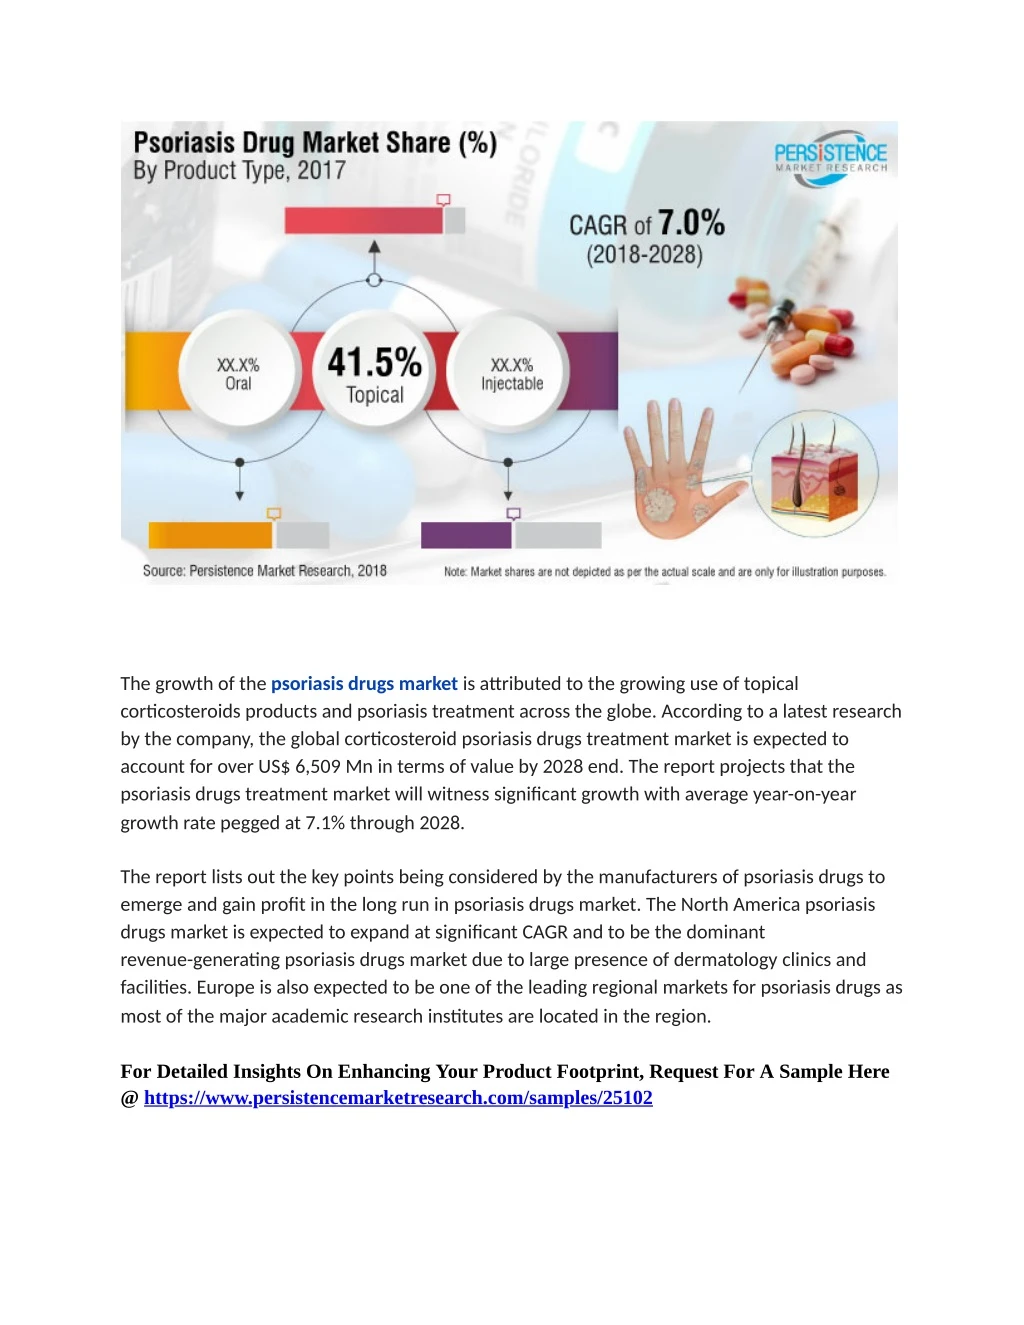 the growth of the psoriasis drugs market